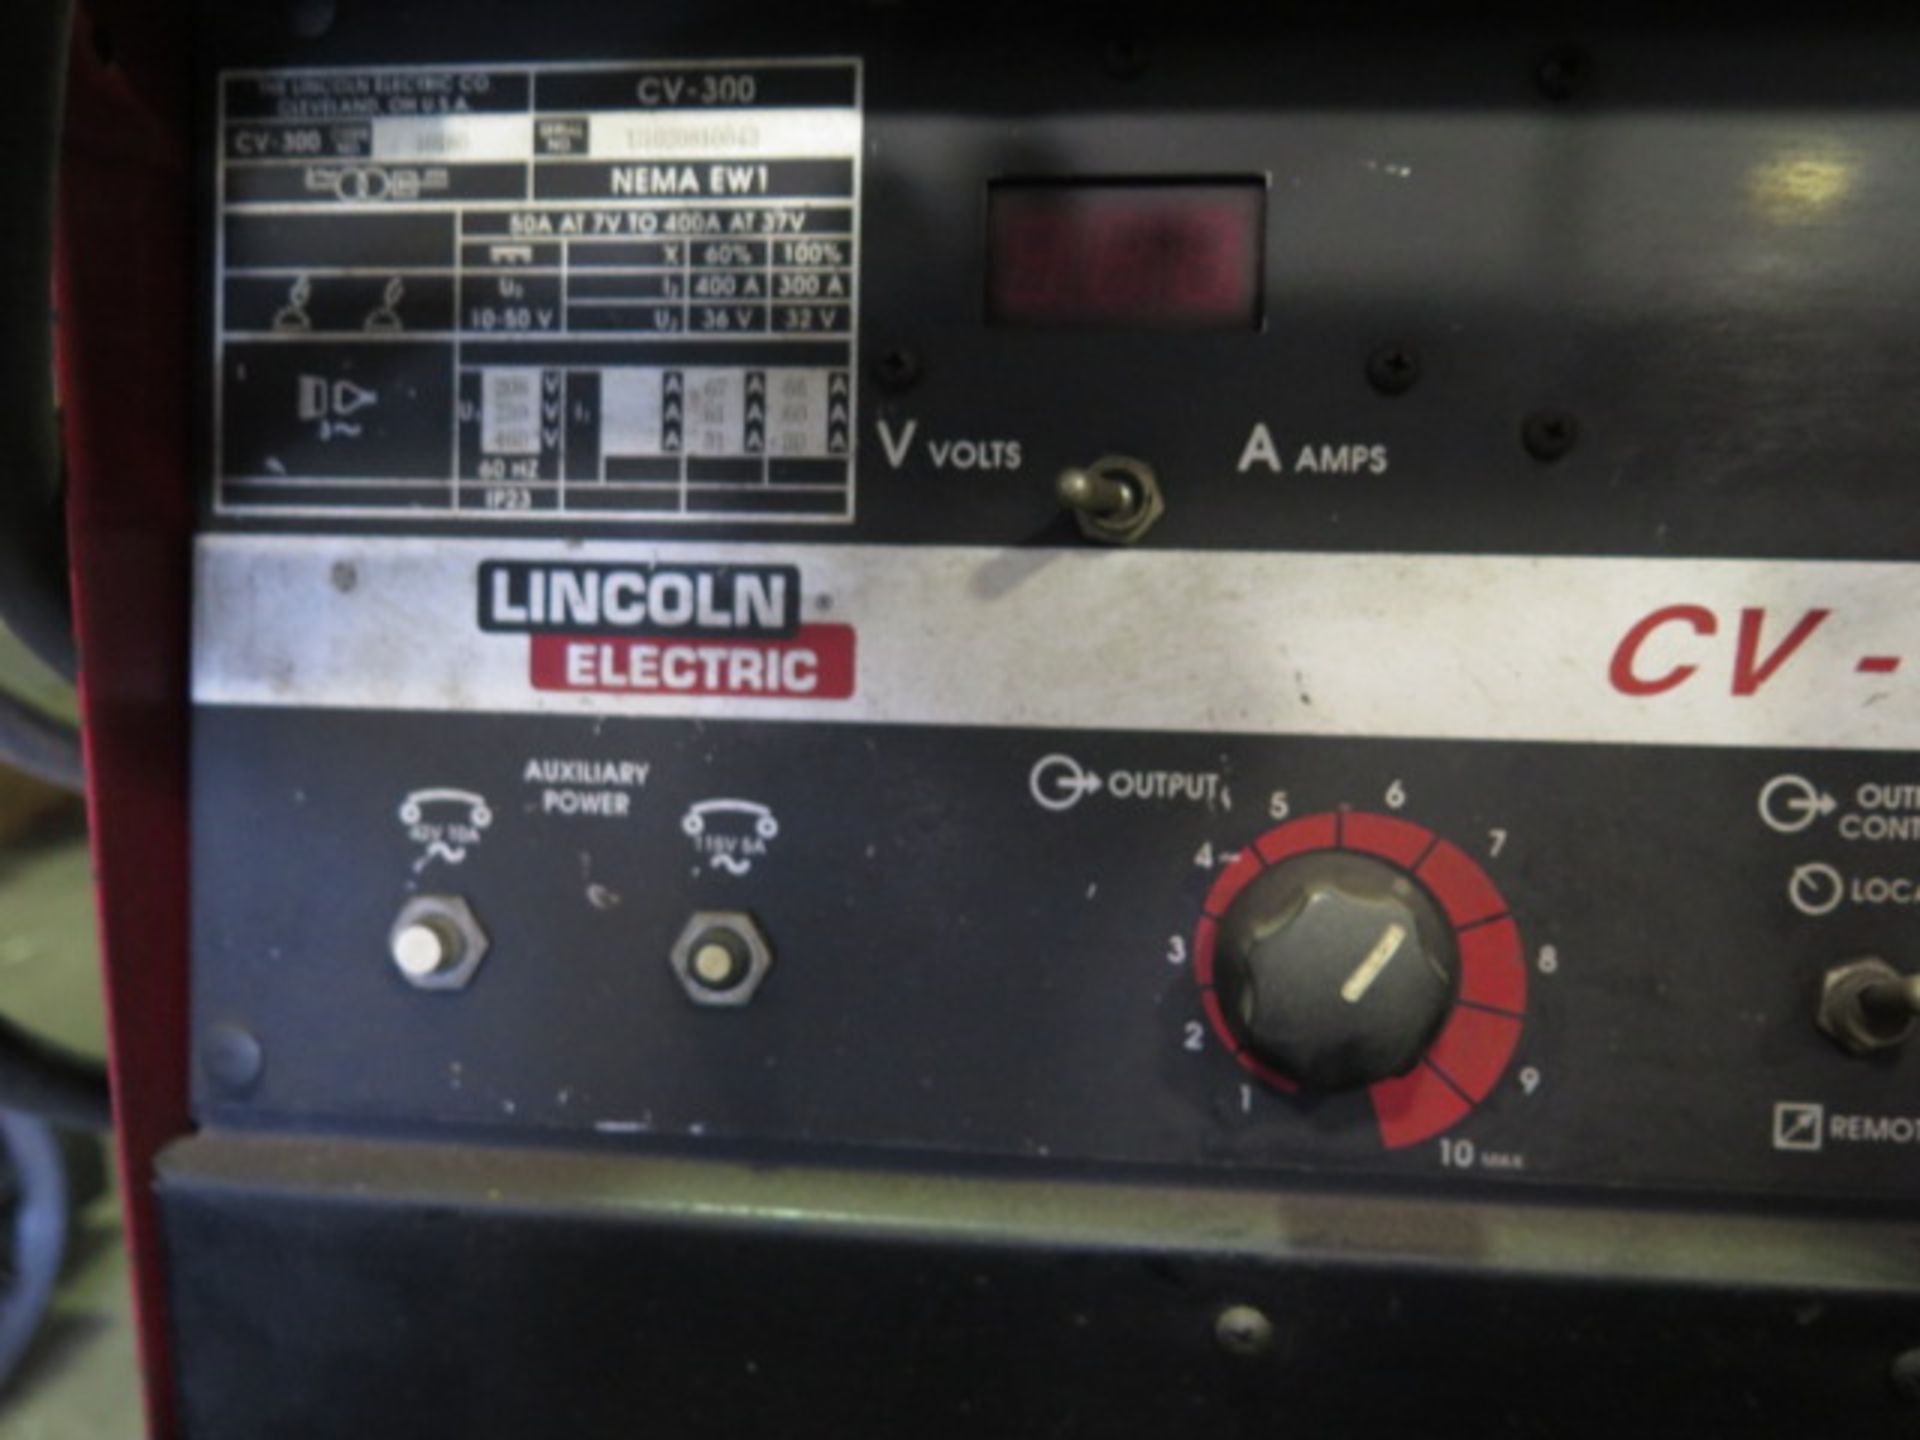 Lincoln CV-300 Arc Welding Power Source w/ Lincoln LN-7 Wire Feed (SOLD AS-IS - NO WARRANTY) - Image 5 of 12